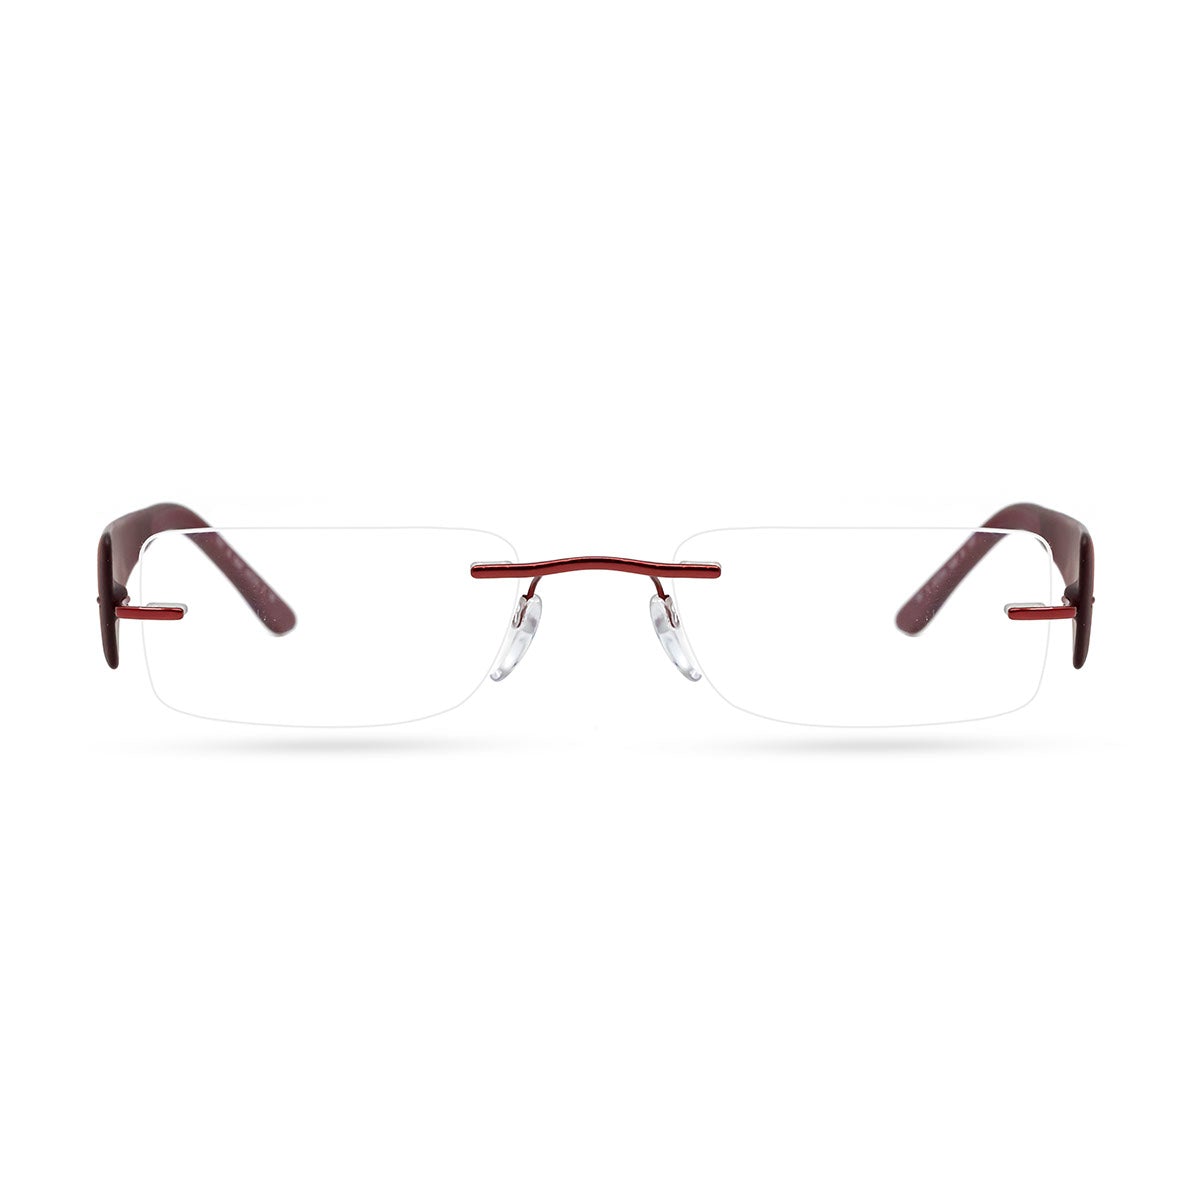 SILHOUETTE 7617 40 6054 spectacle-frame